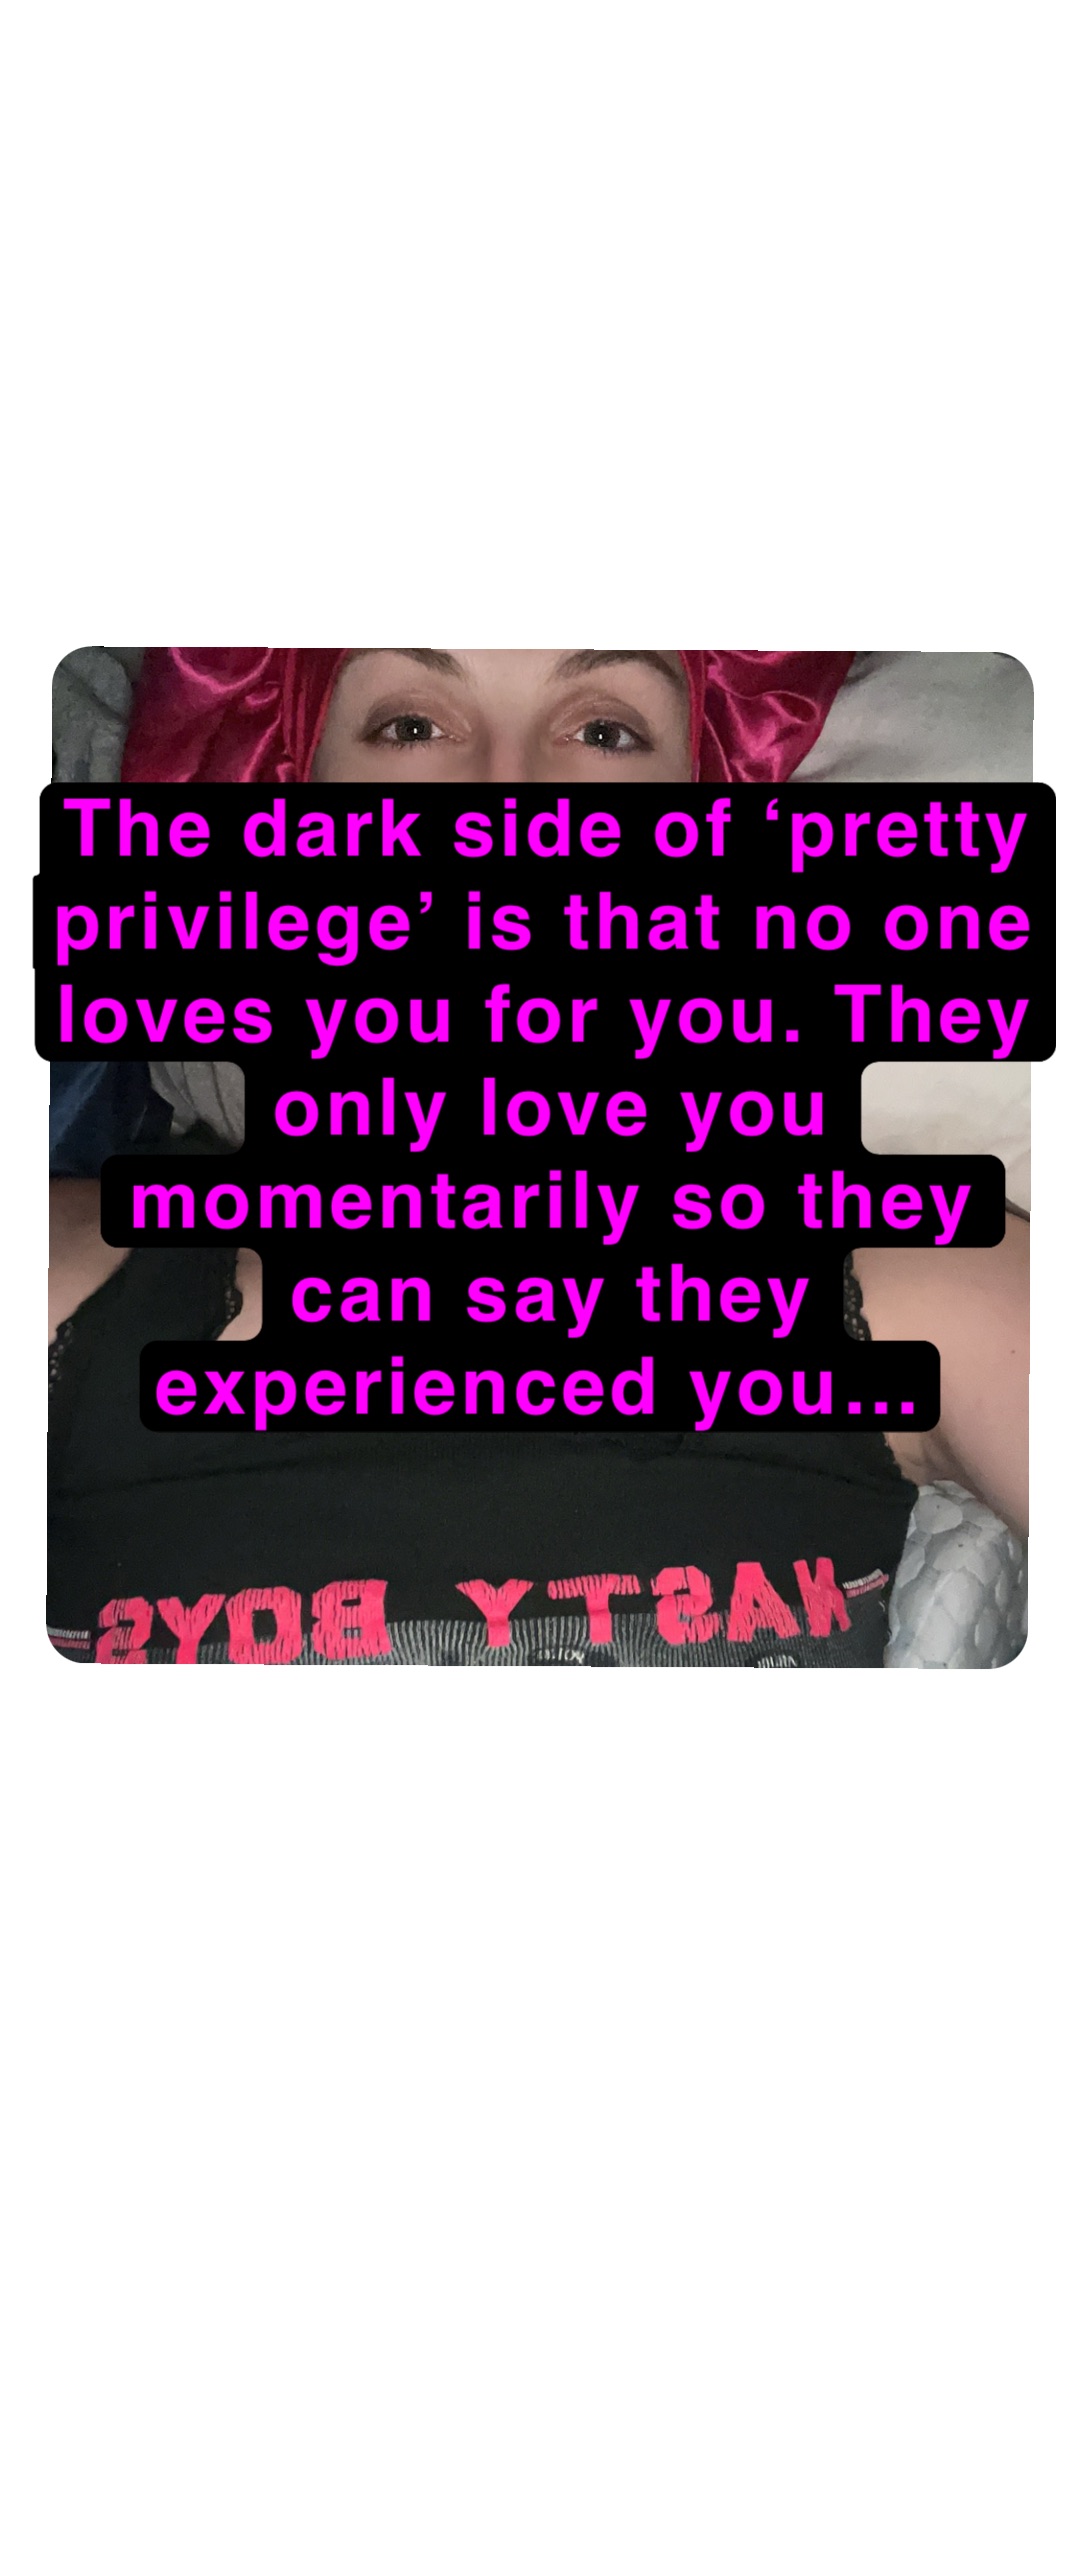 The dark side of ‘pretty privilege’ is that no one loves you for you. They only love you momentarily so they can say they experienced you…